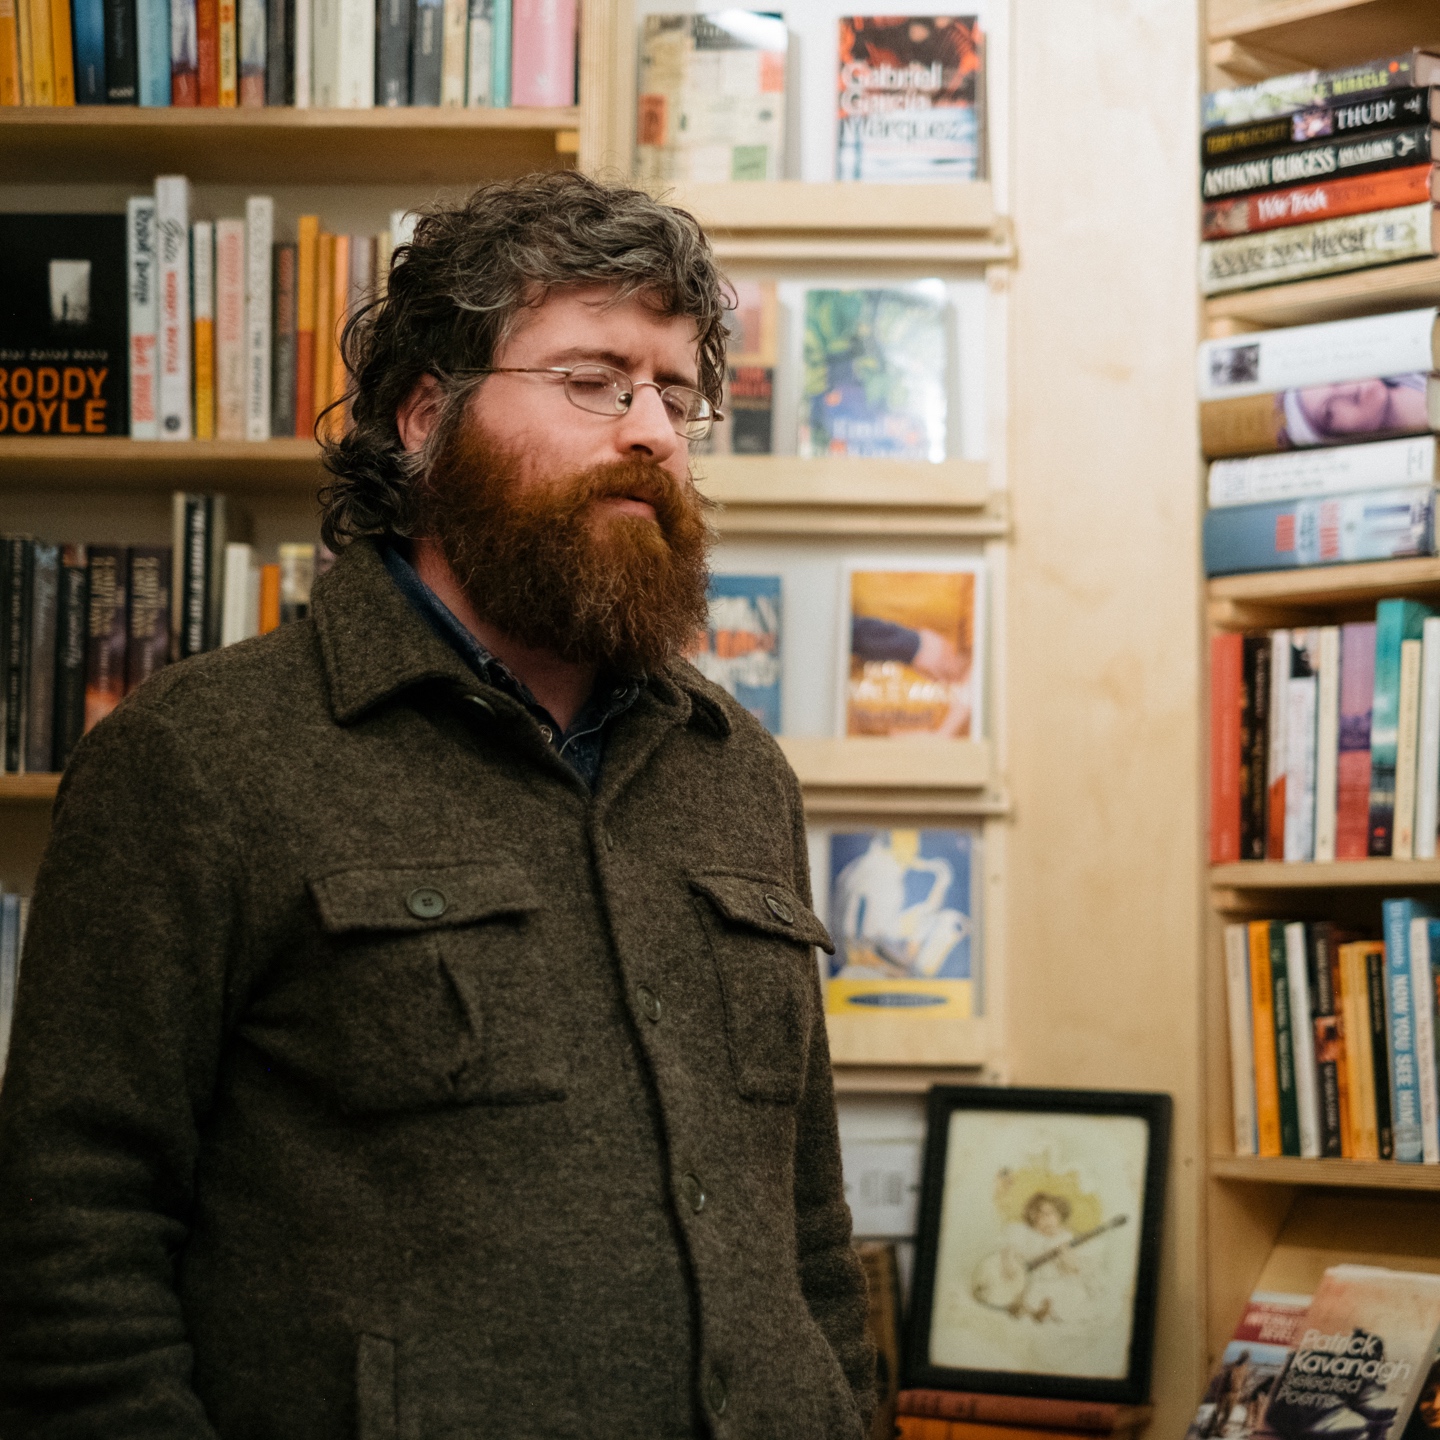 Alan Woods performing in the bookshop